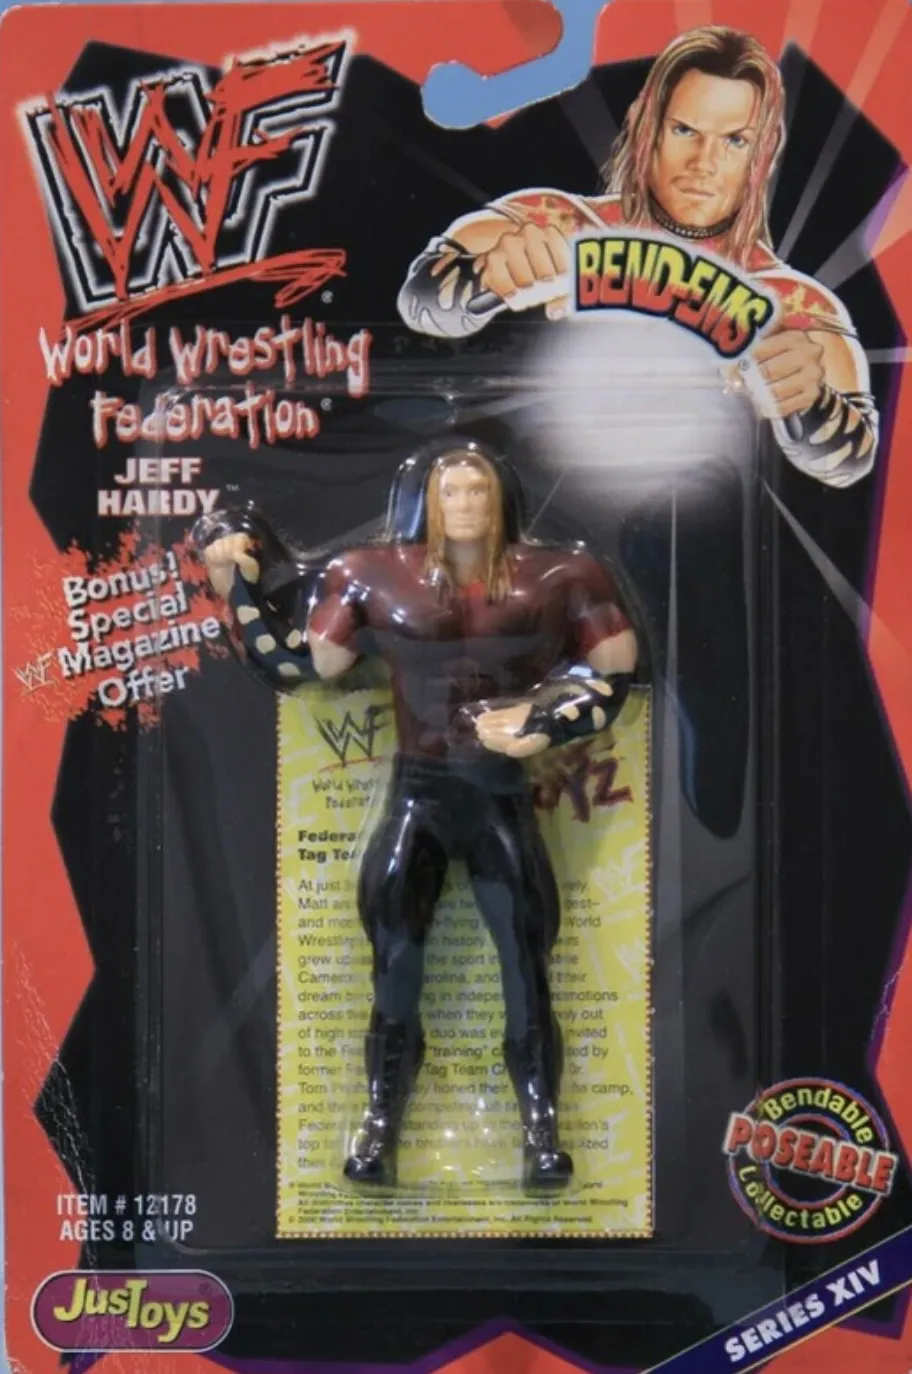 Jeff Hardy Bendems action figure